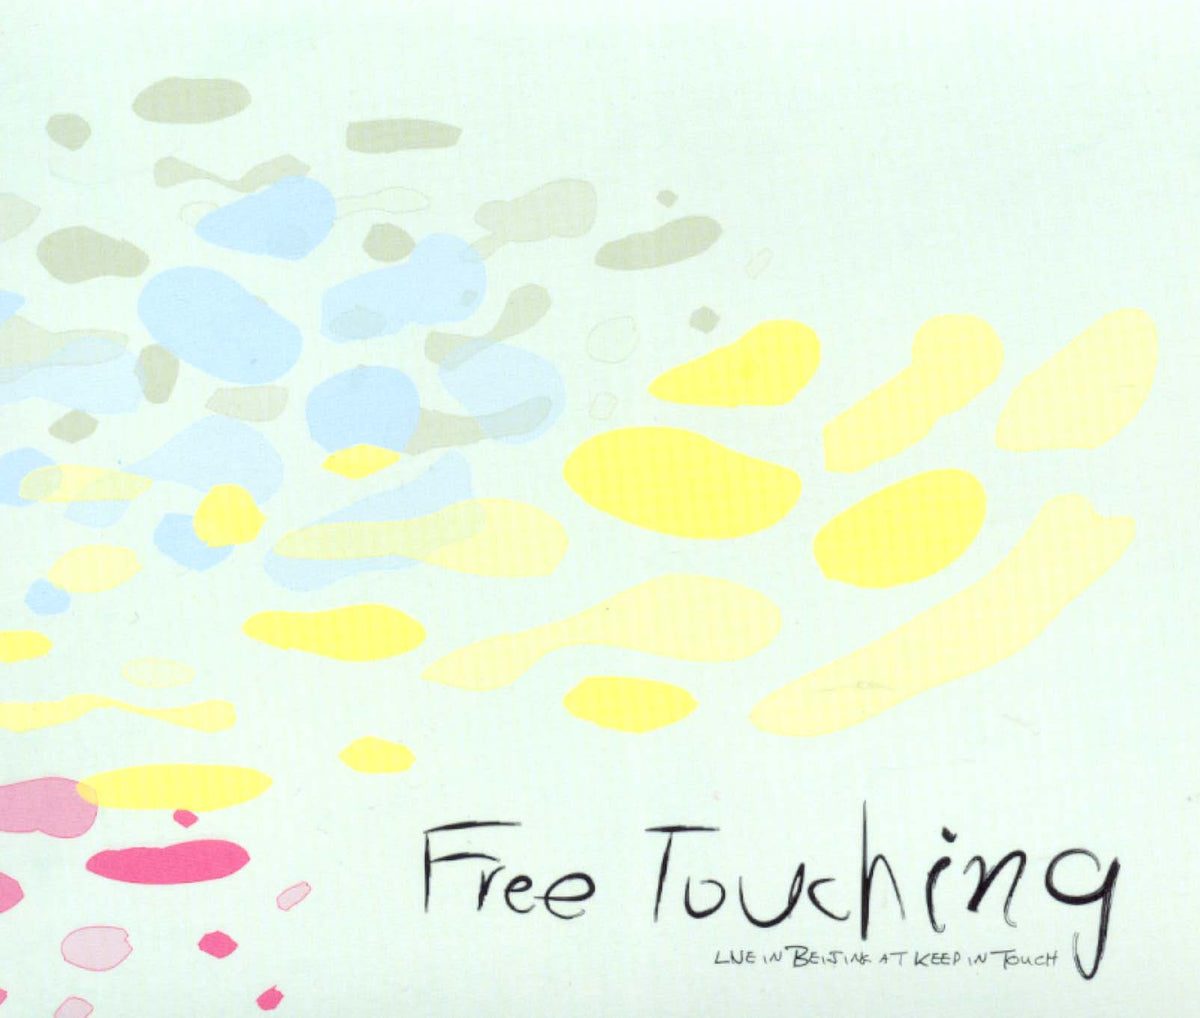 Free Touching - Live in Beijing at Keep in Touch / Noise Asia / 2CD set